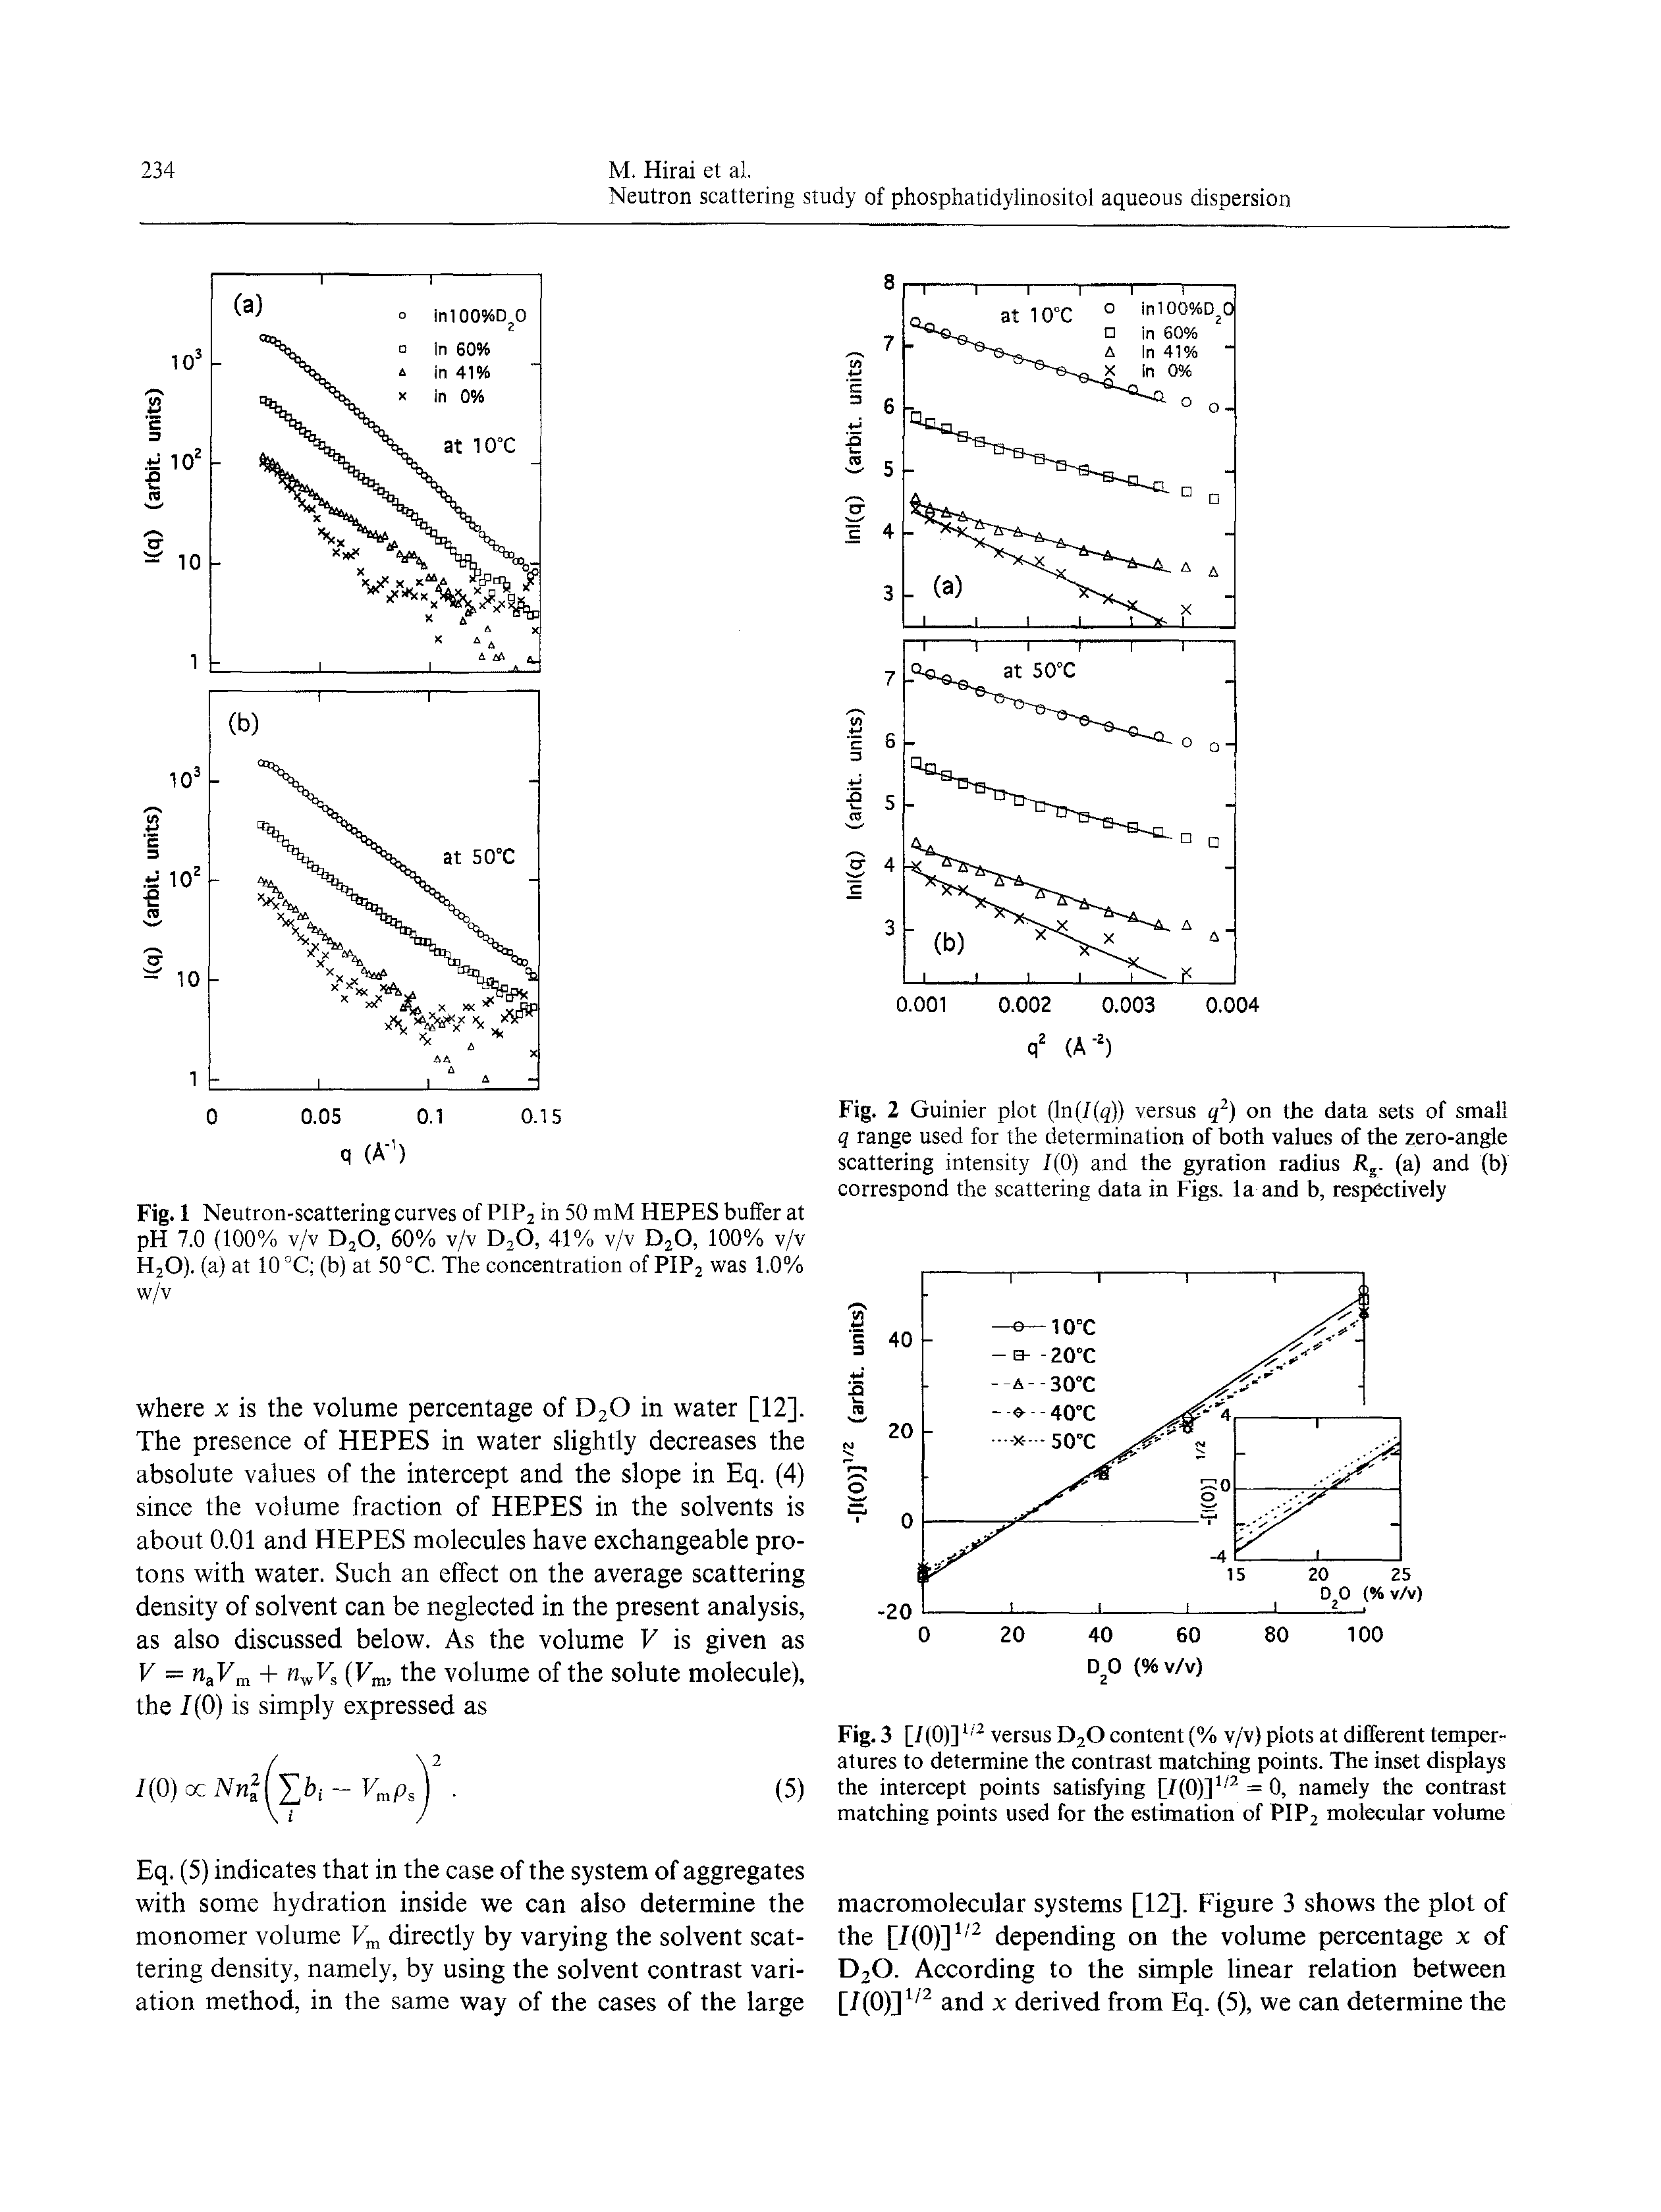 Fig. 2 Guinier plot (ln(/(q)) versus q ) on the data sets of small q range used for the determination of both values of the zero-angle scattering intensity /(O) and the gyration radius R. (a) and (b) correspond the scattering data in Figs, la and b, respectively...